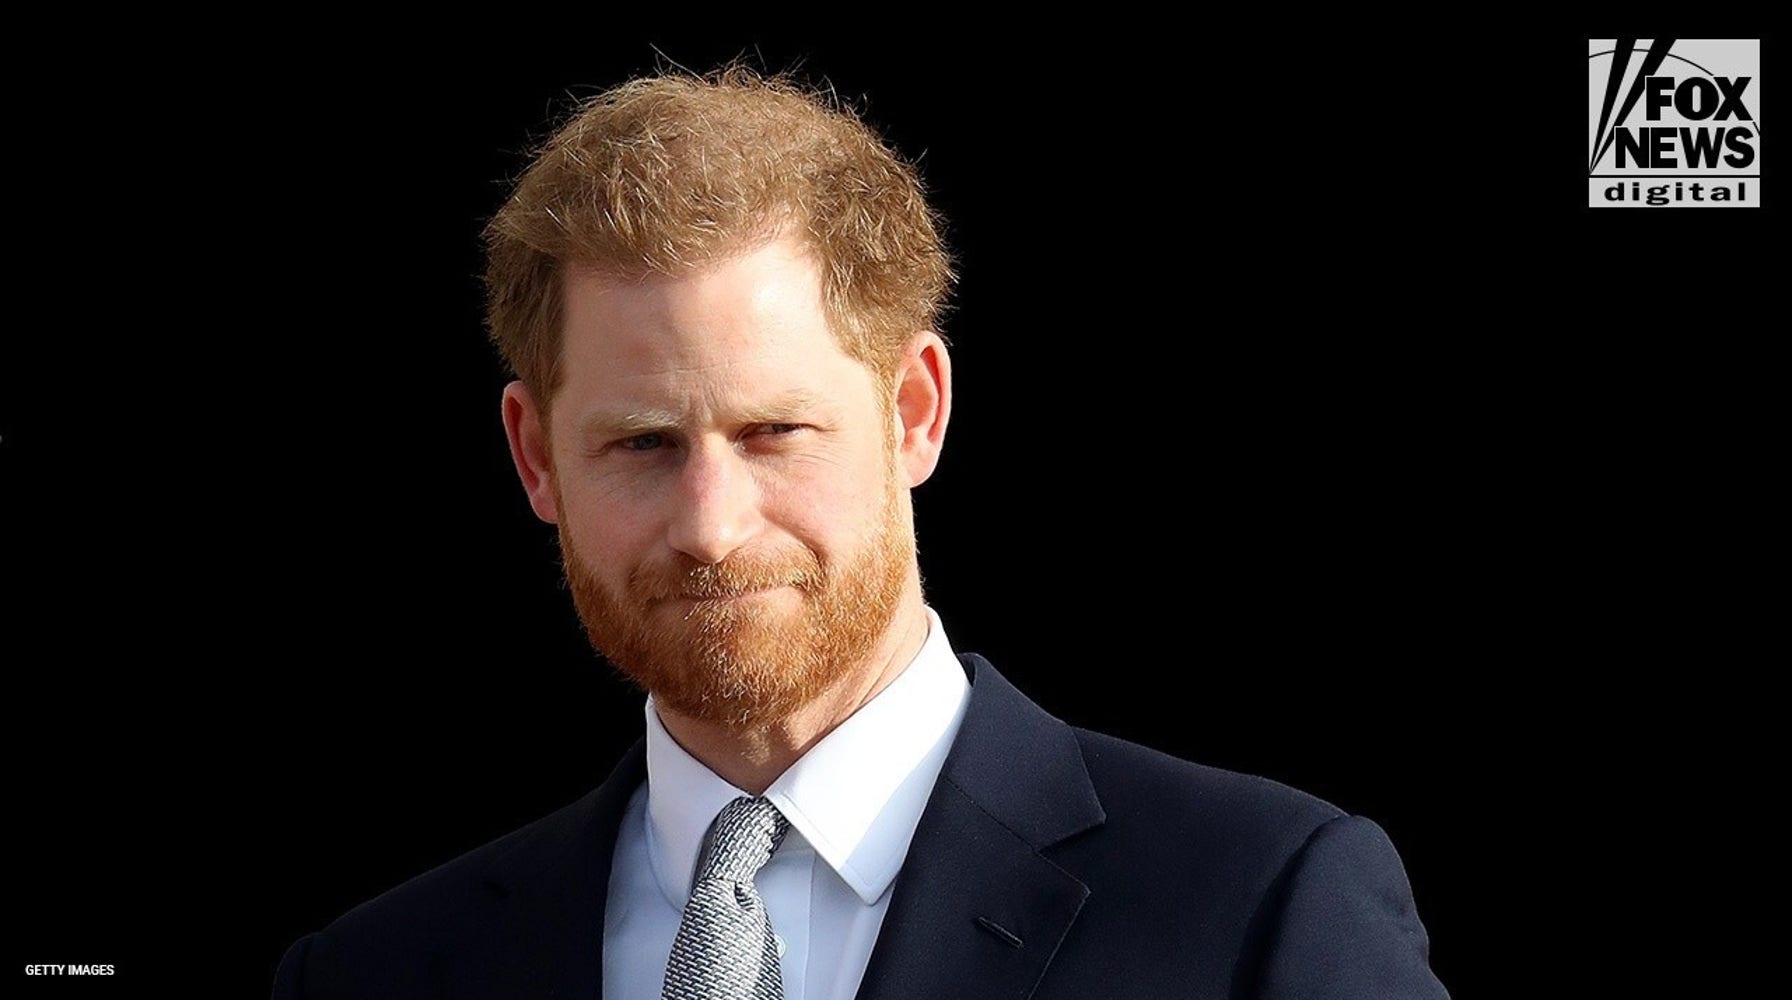 Prince Harry Faces Uncertain Future After Tell-Alls, Says Royal Expert